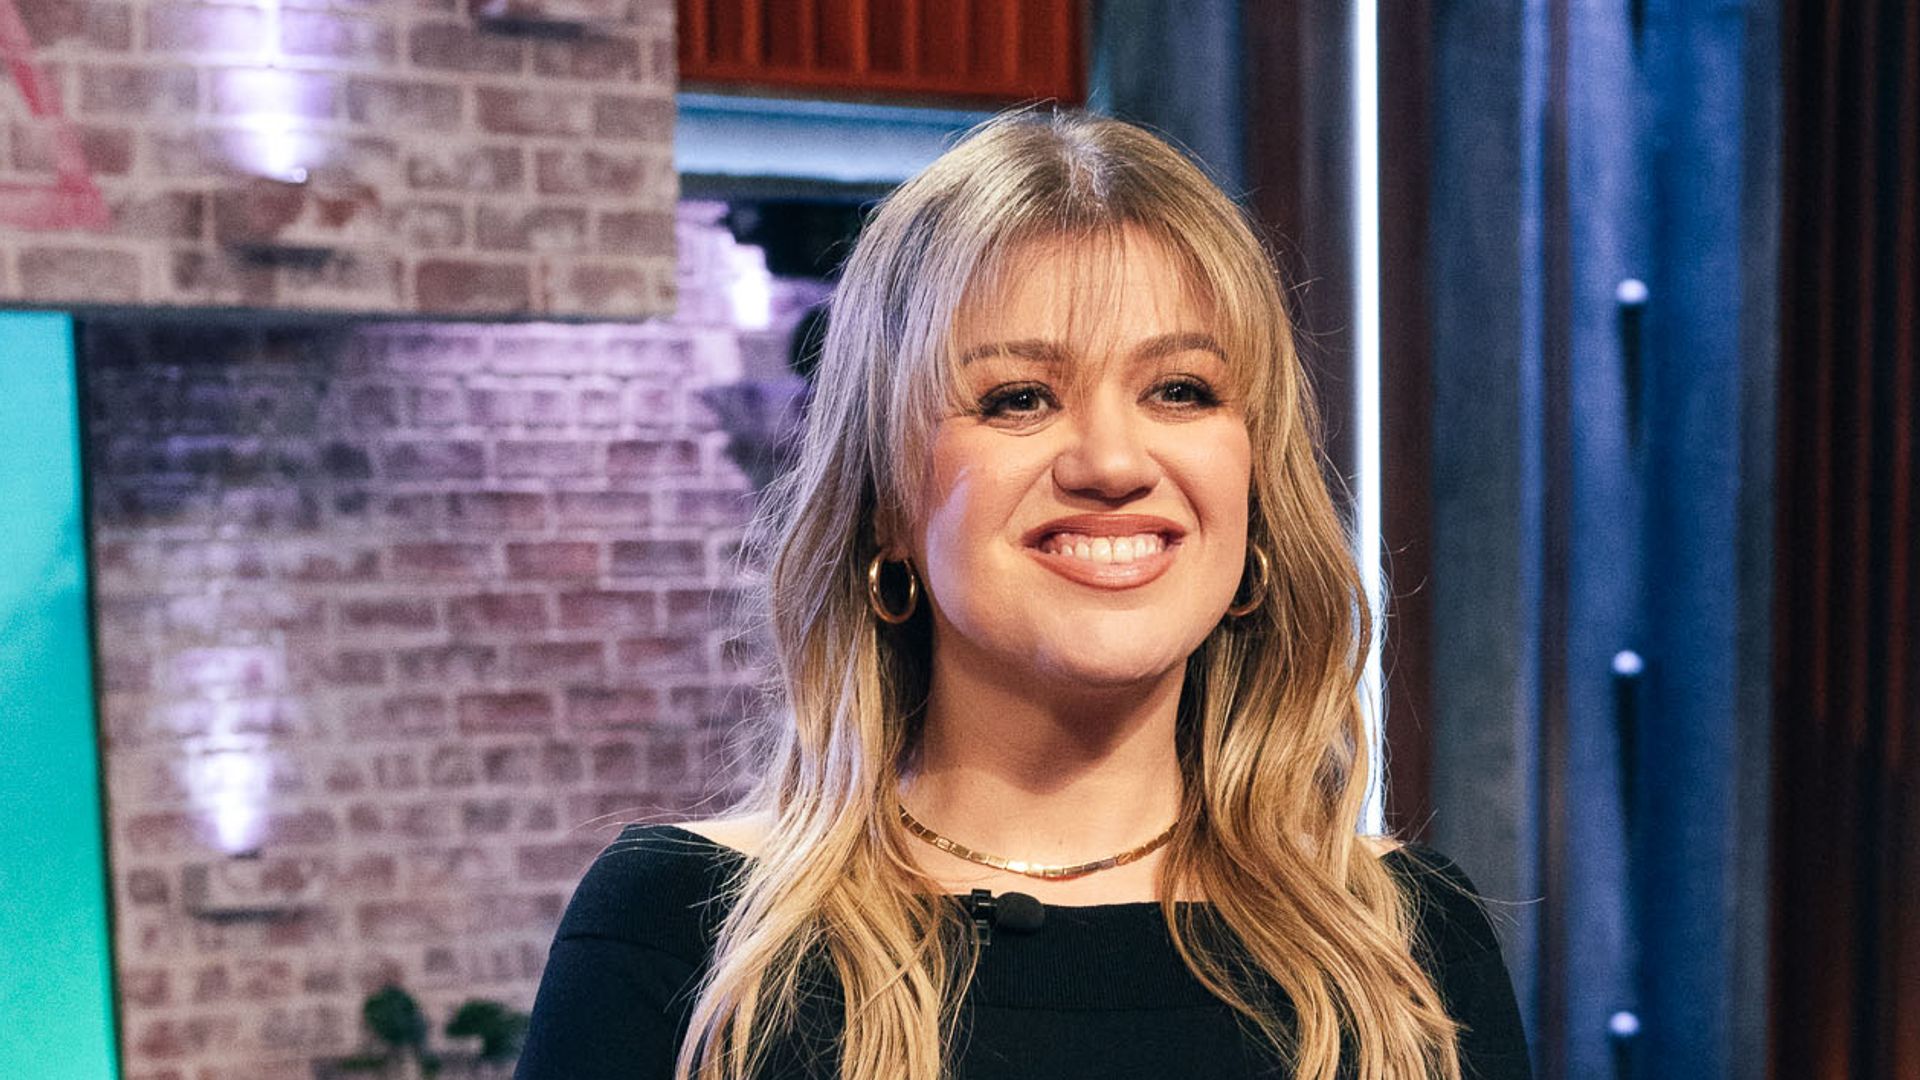 THE KELLY CLARKSON SHOW -- Episode 7I029 -- Pictured: Kelly Clarkson